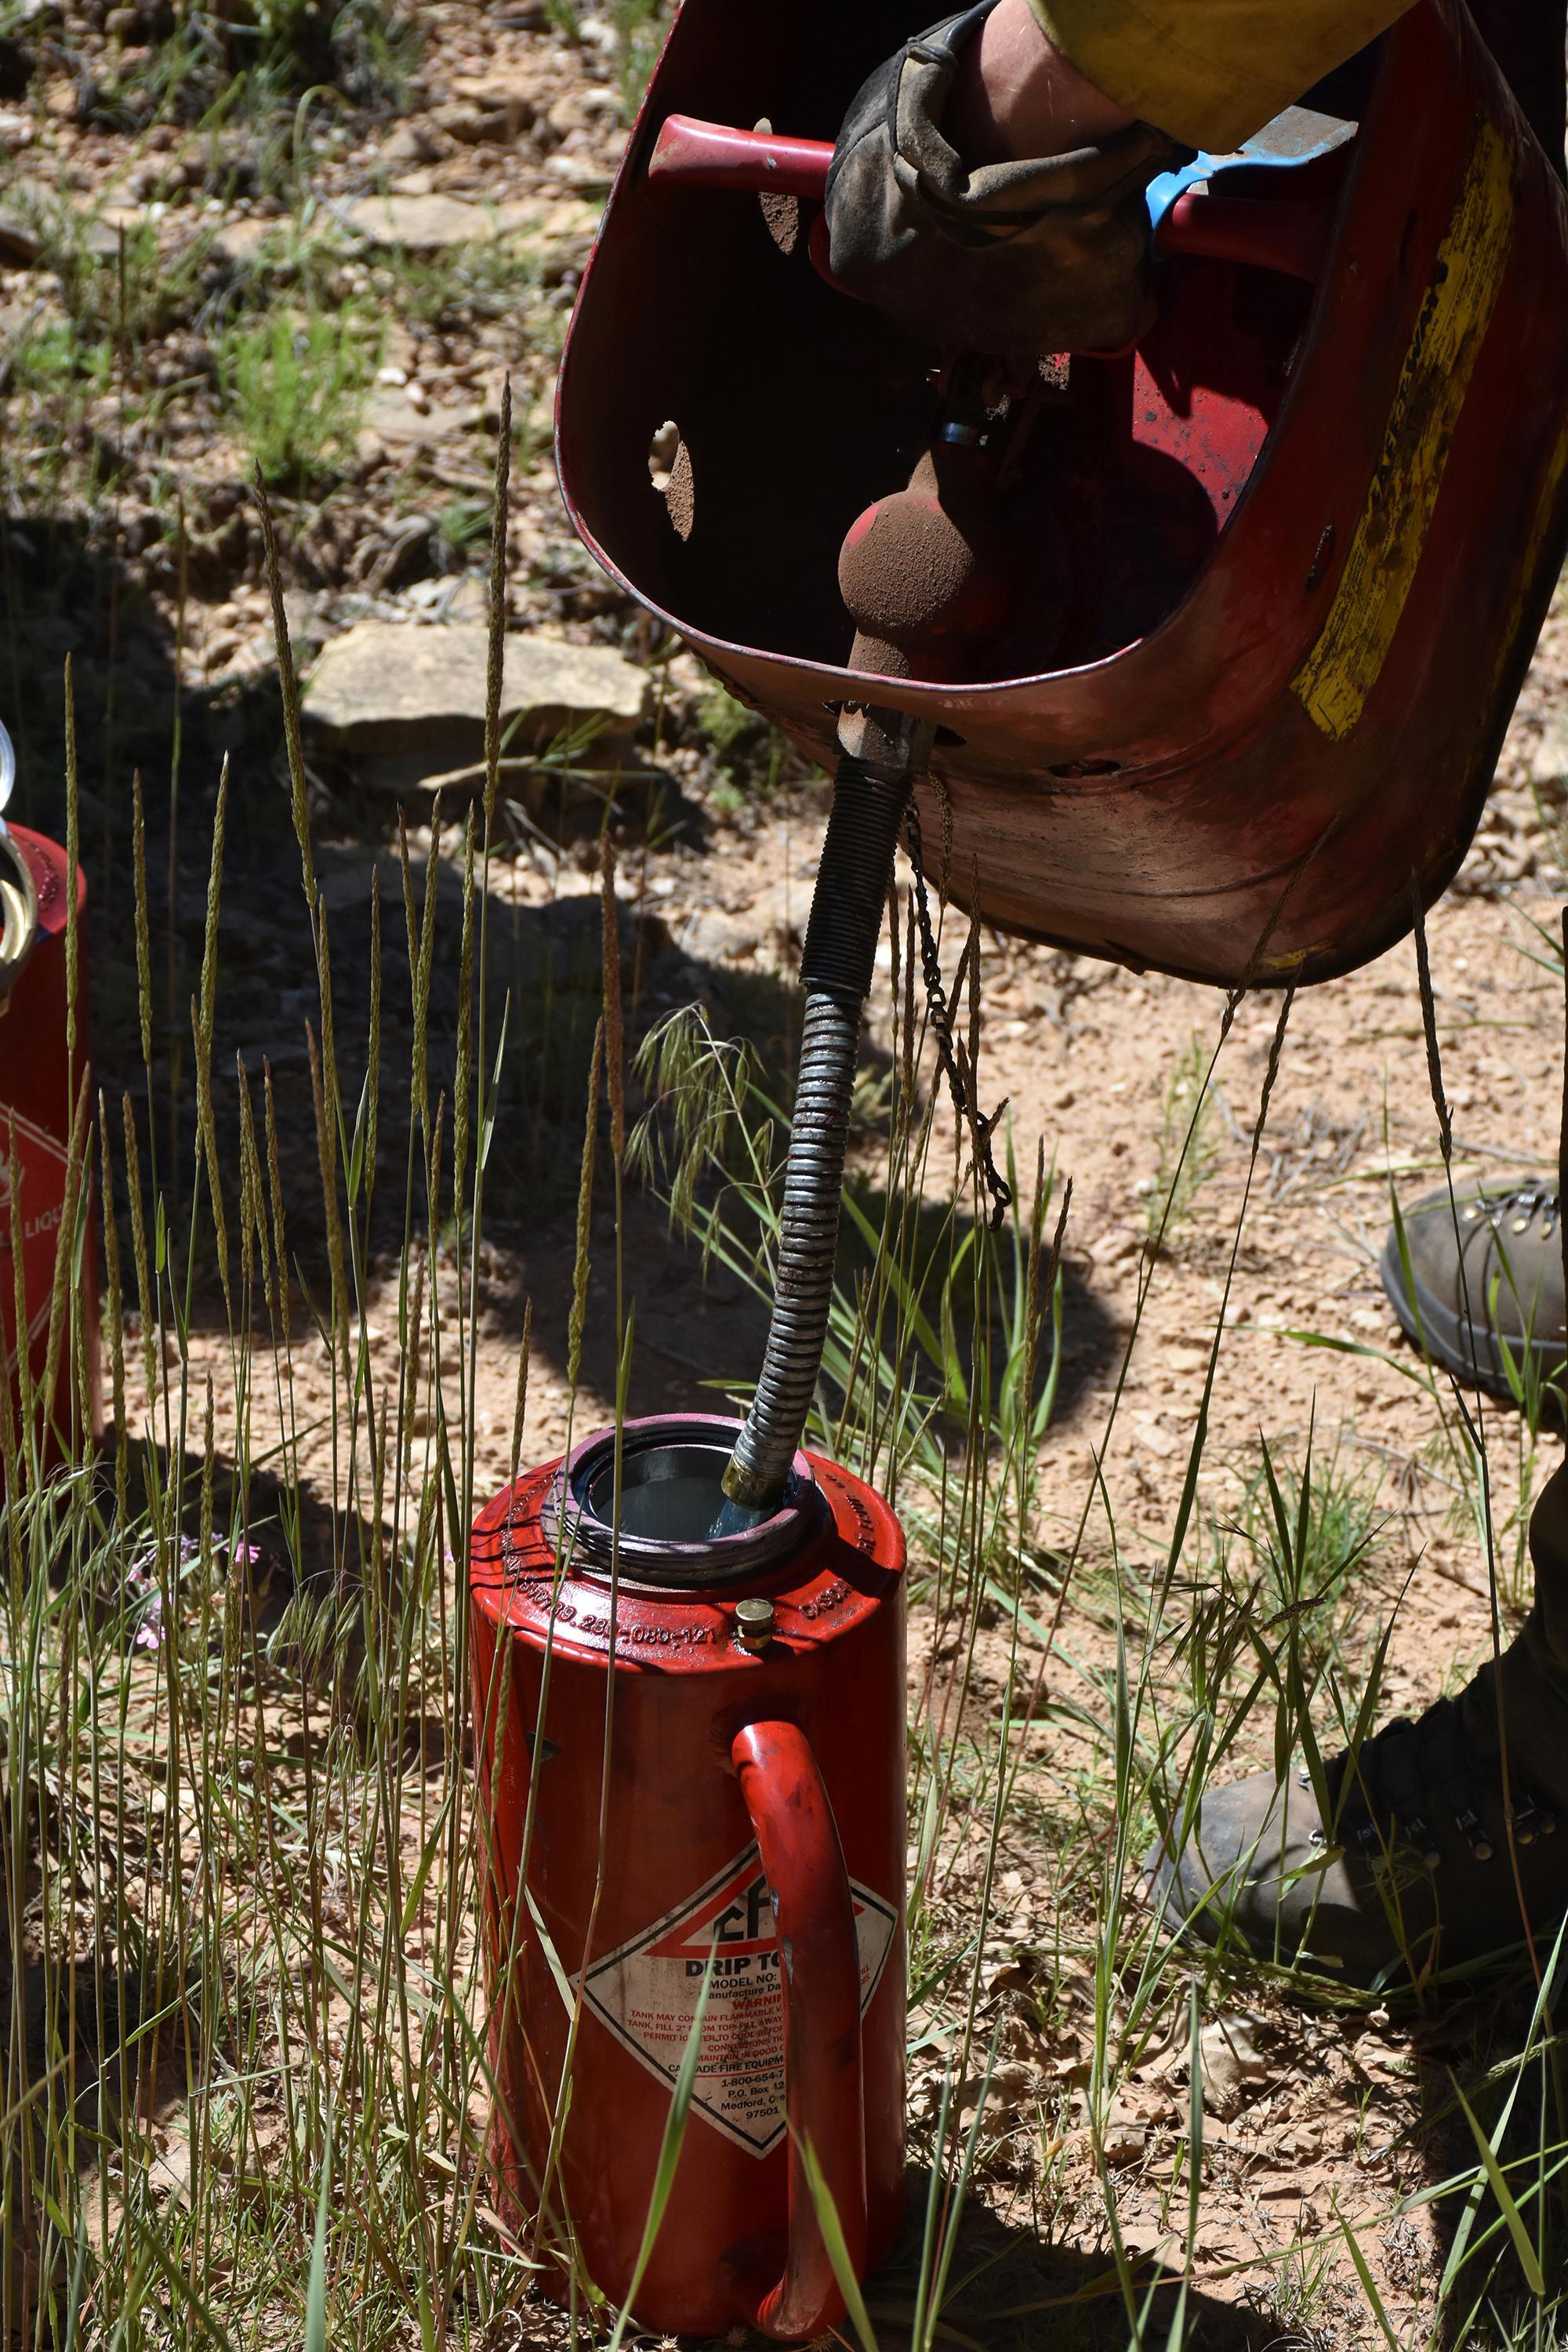 Refueling the drip torch so the firefighter can drop fire.